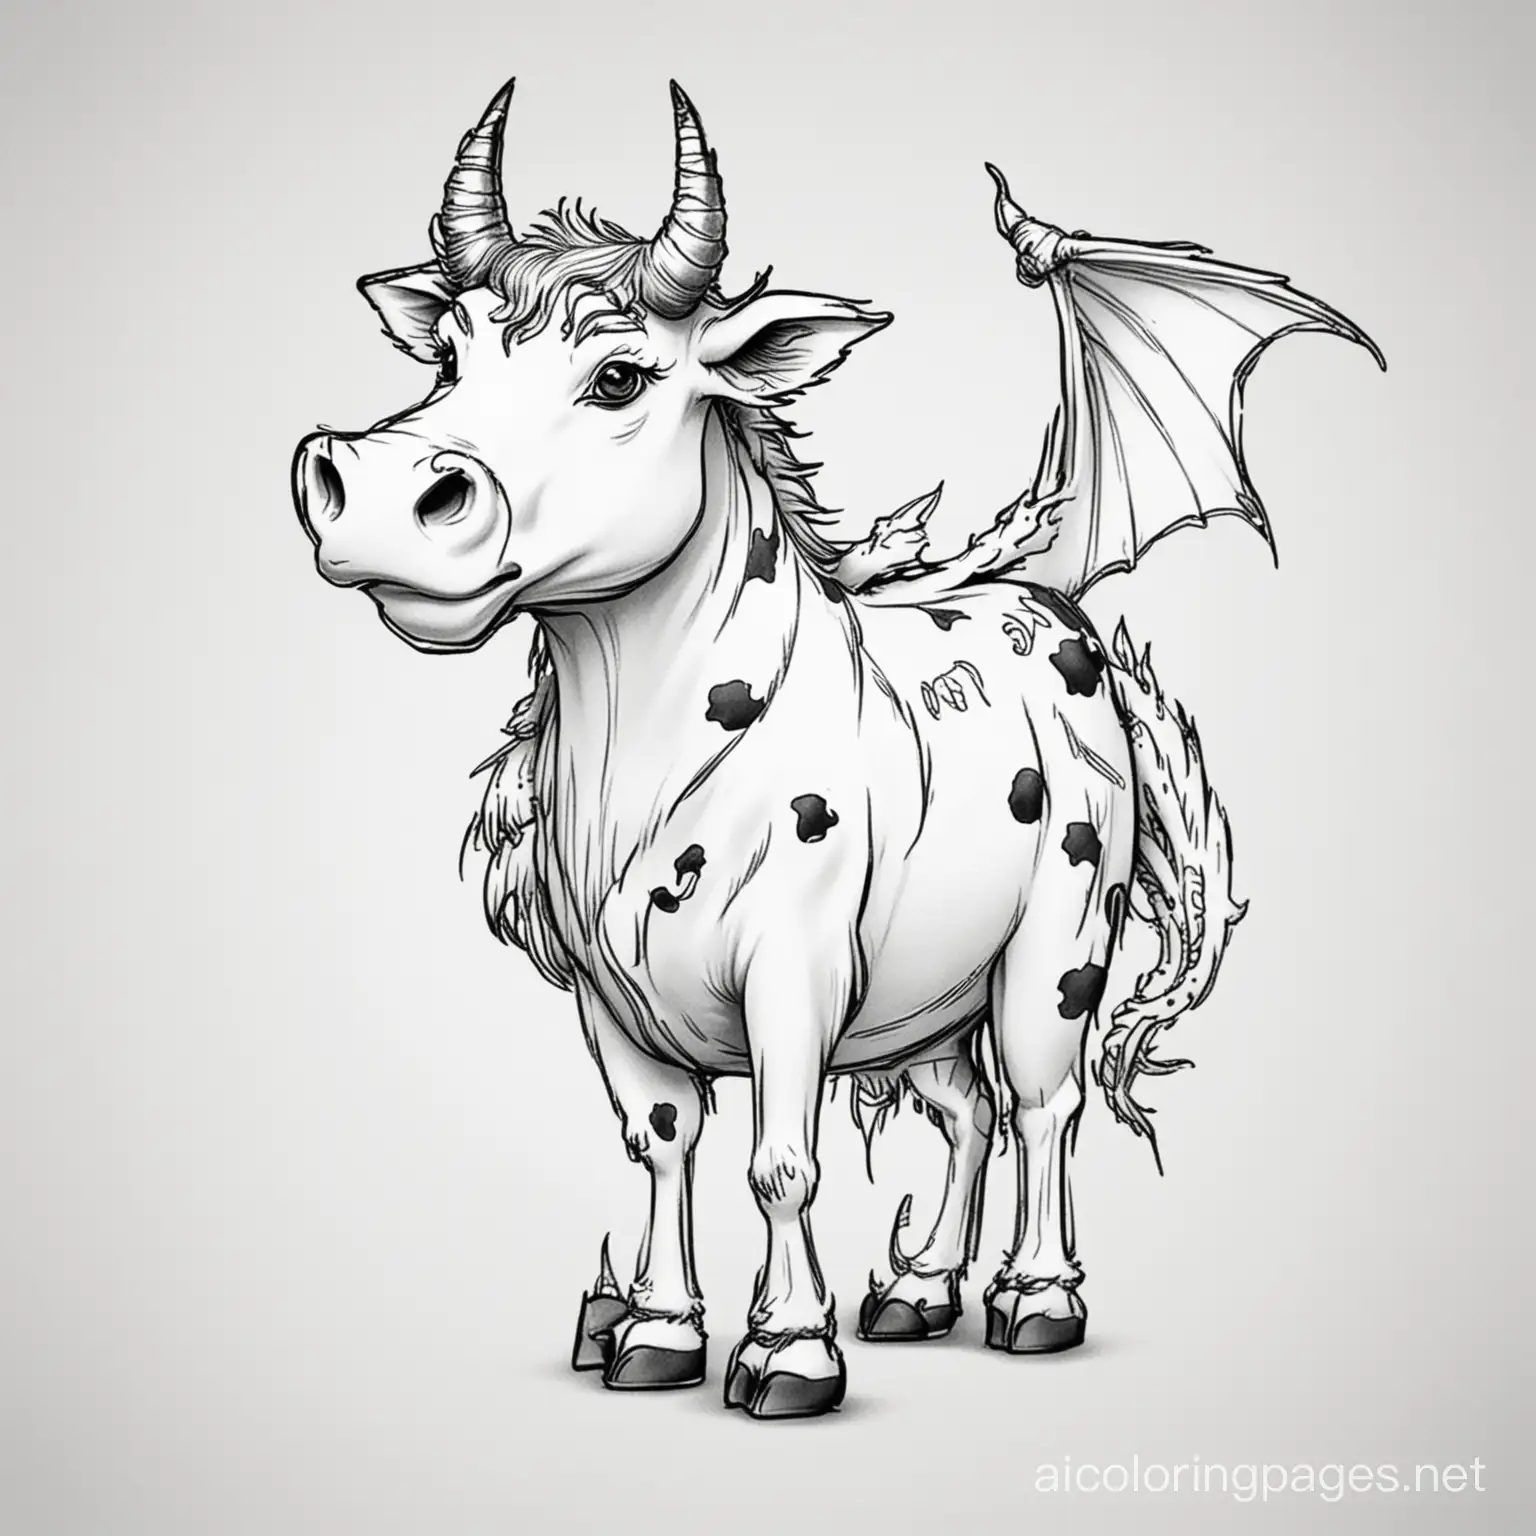 cow fused with a dragon, Coloring Page, black and white, line art, white background, Simplicity, Ample White Space. The background of the coloring page is plain white to make it easy for young children to color within the lines. The outlines of all the subjects are easy to distinguish, making it simple for kids to color without too much difficulty